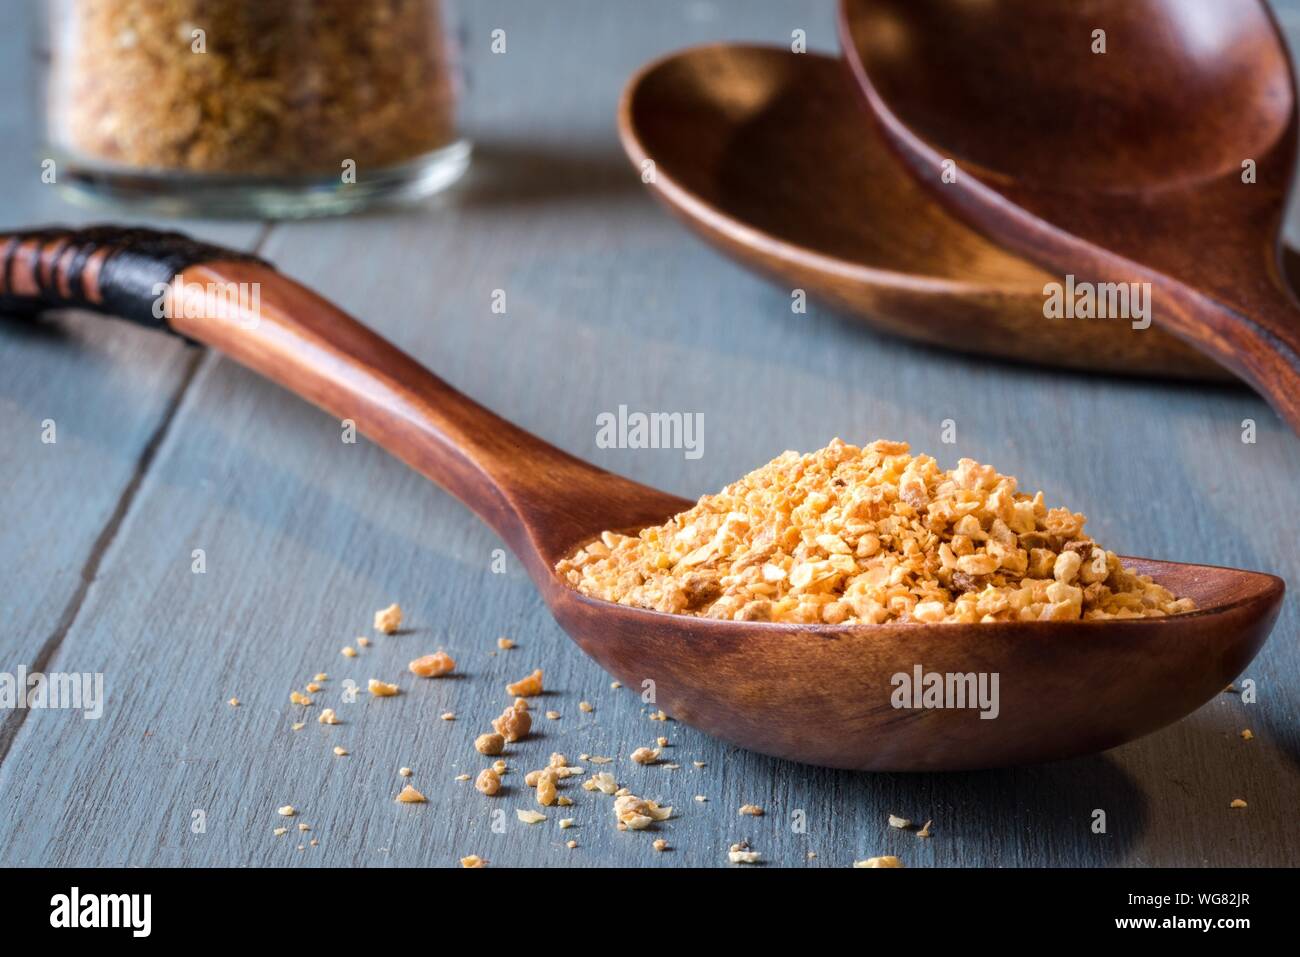 Close-up Of Dried Orange Peel In Wooden Spoon On Table Stock Photo